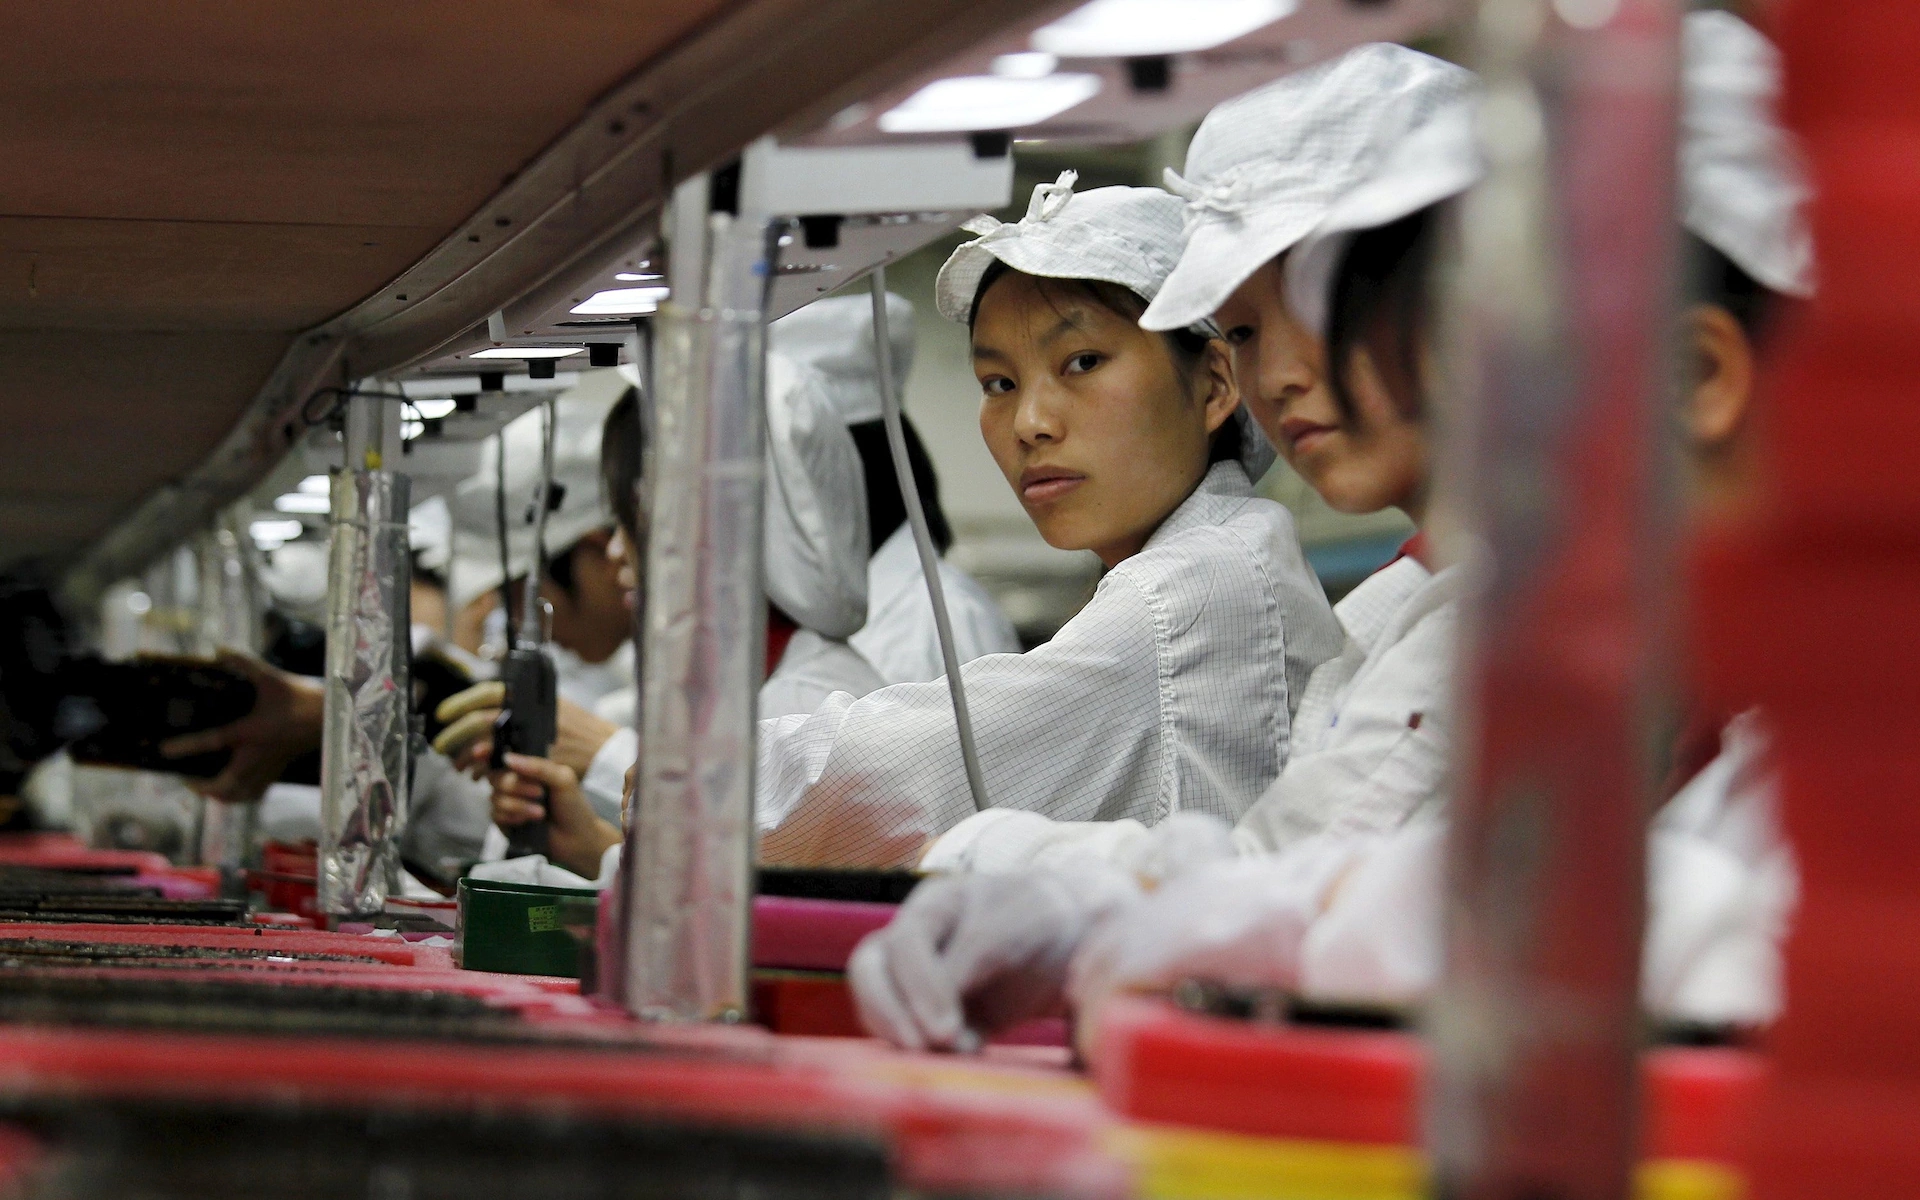 iPhone Maker Foxconn will Cut $2.9bn in Costs as Tech Gloom Continues